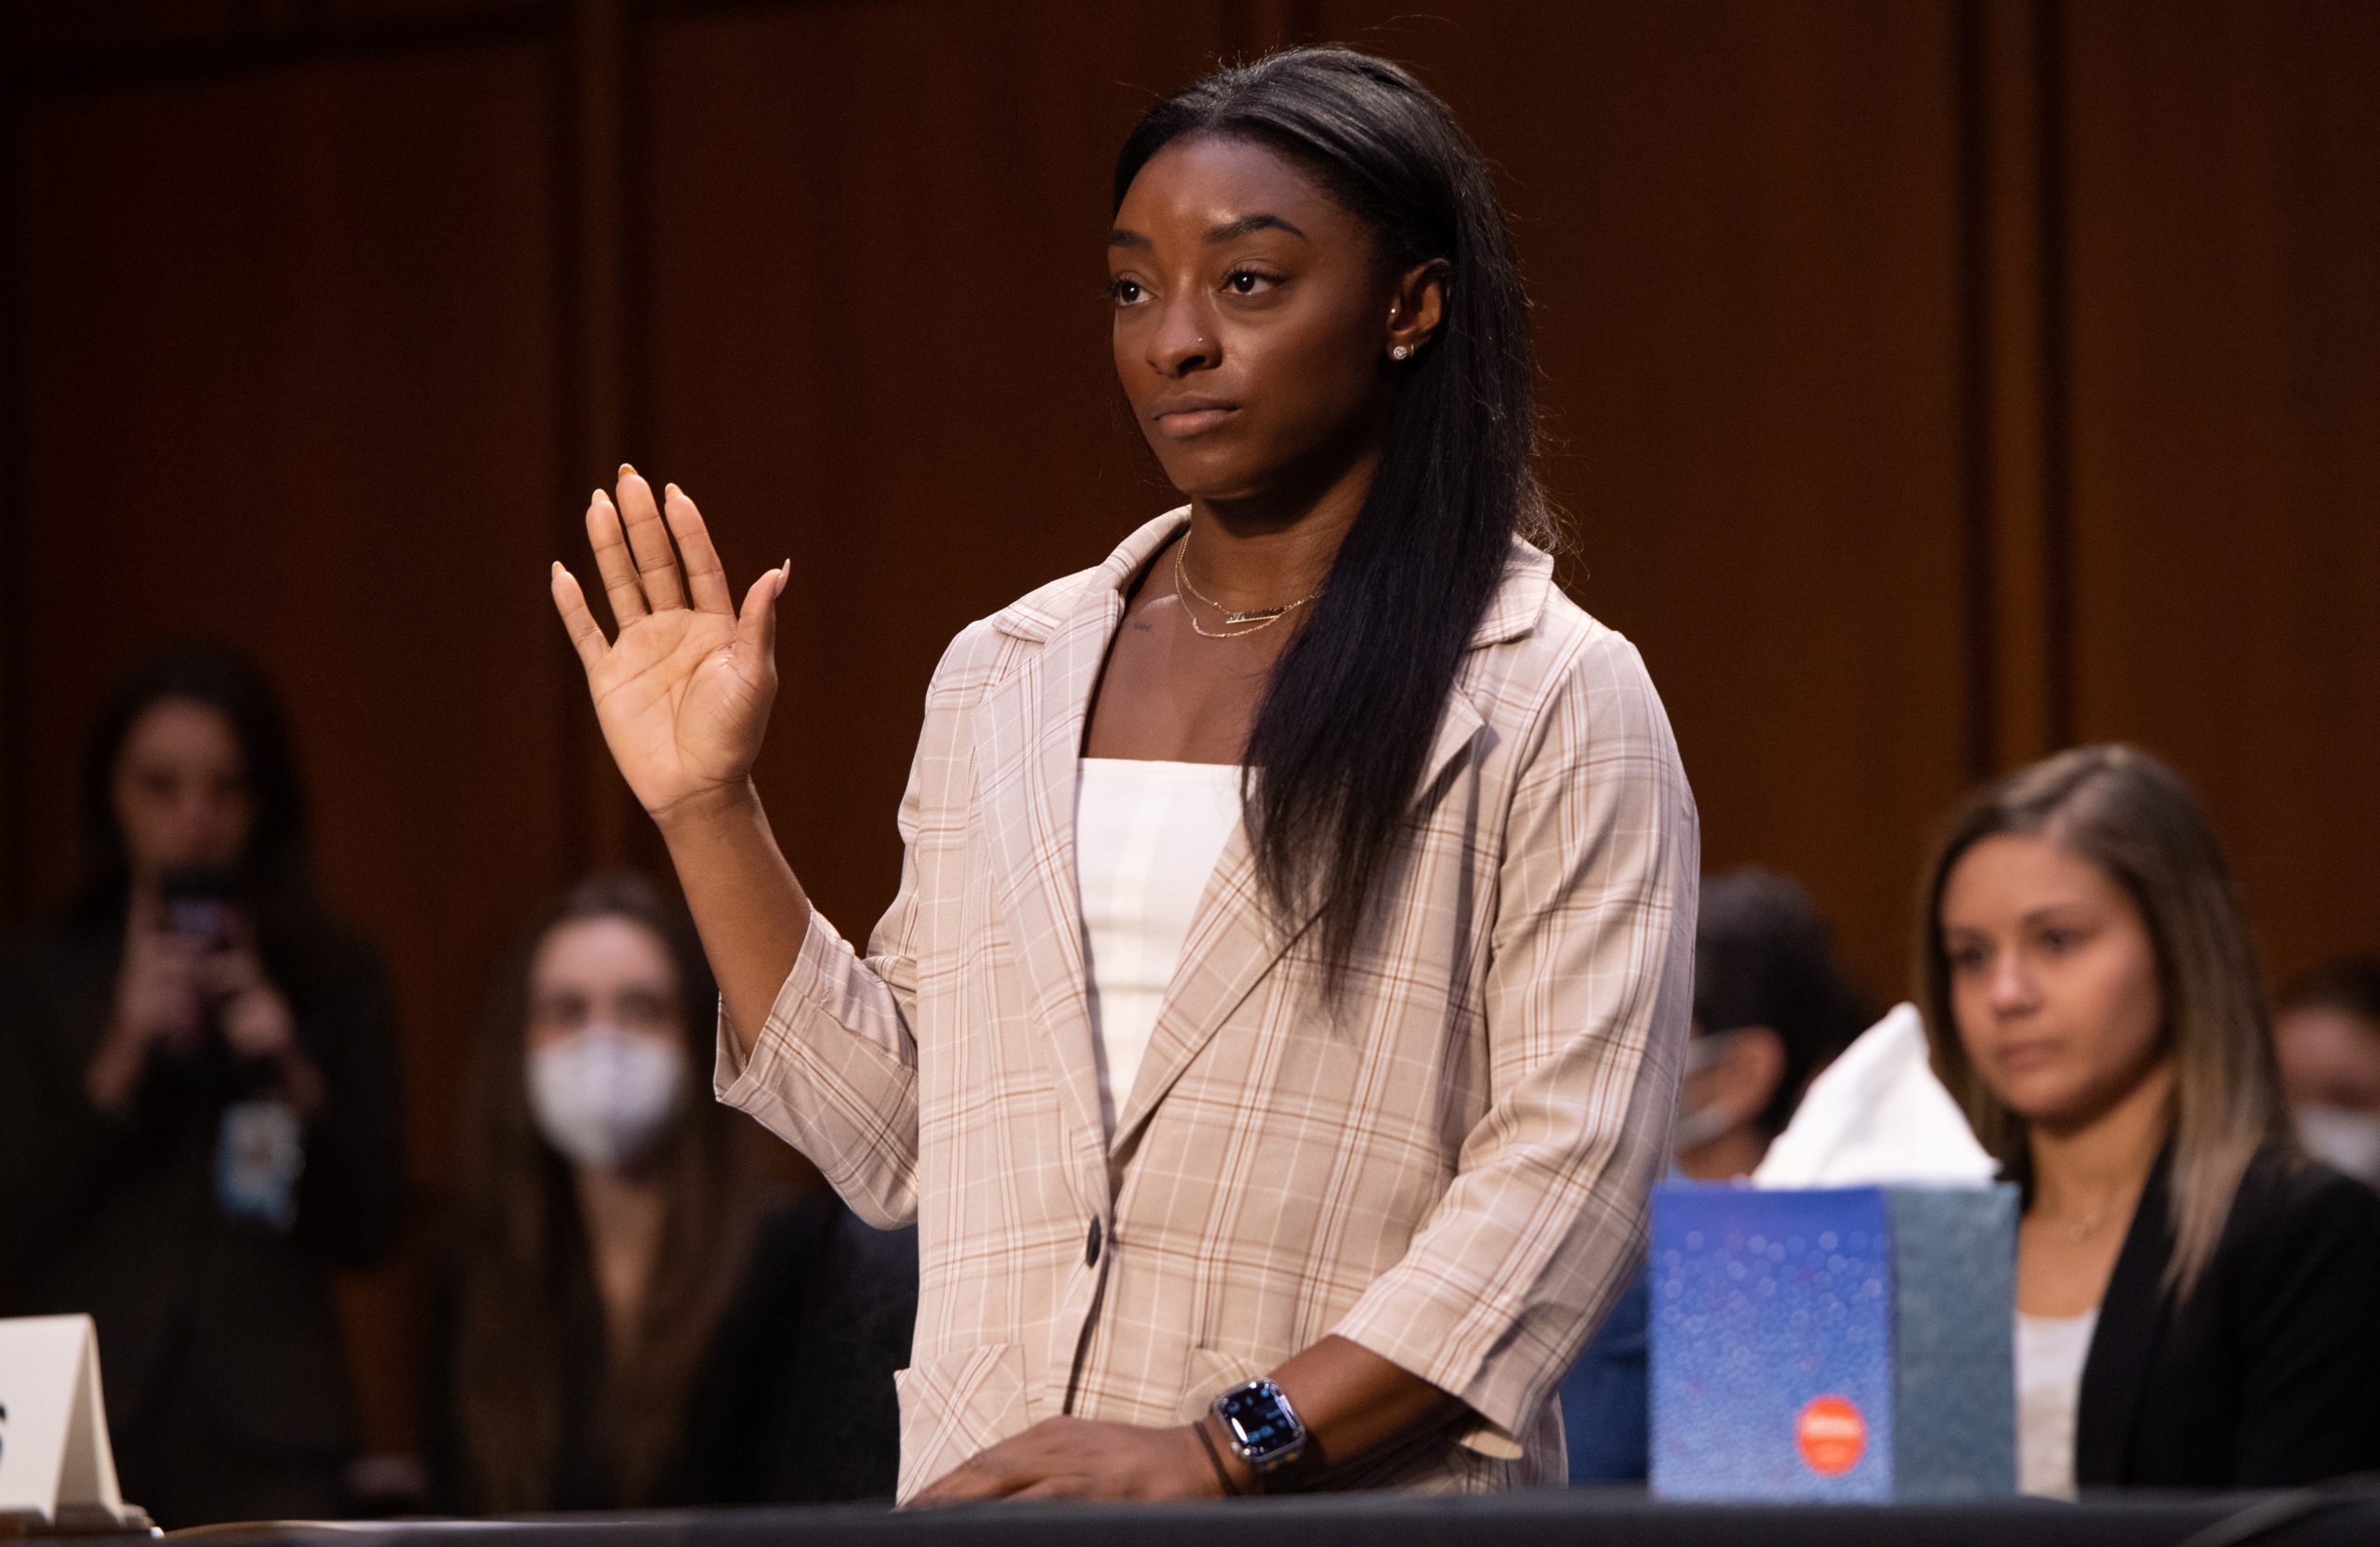 Simone Biles condemns U.S. Olympic Committee, FBI for sex-abuse crisis